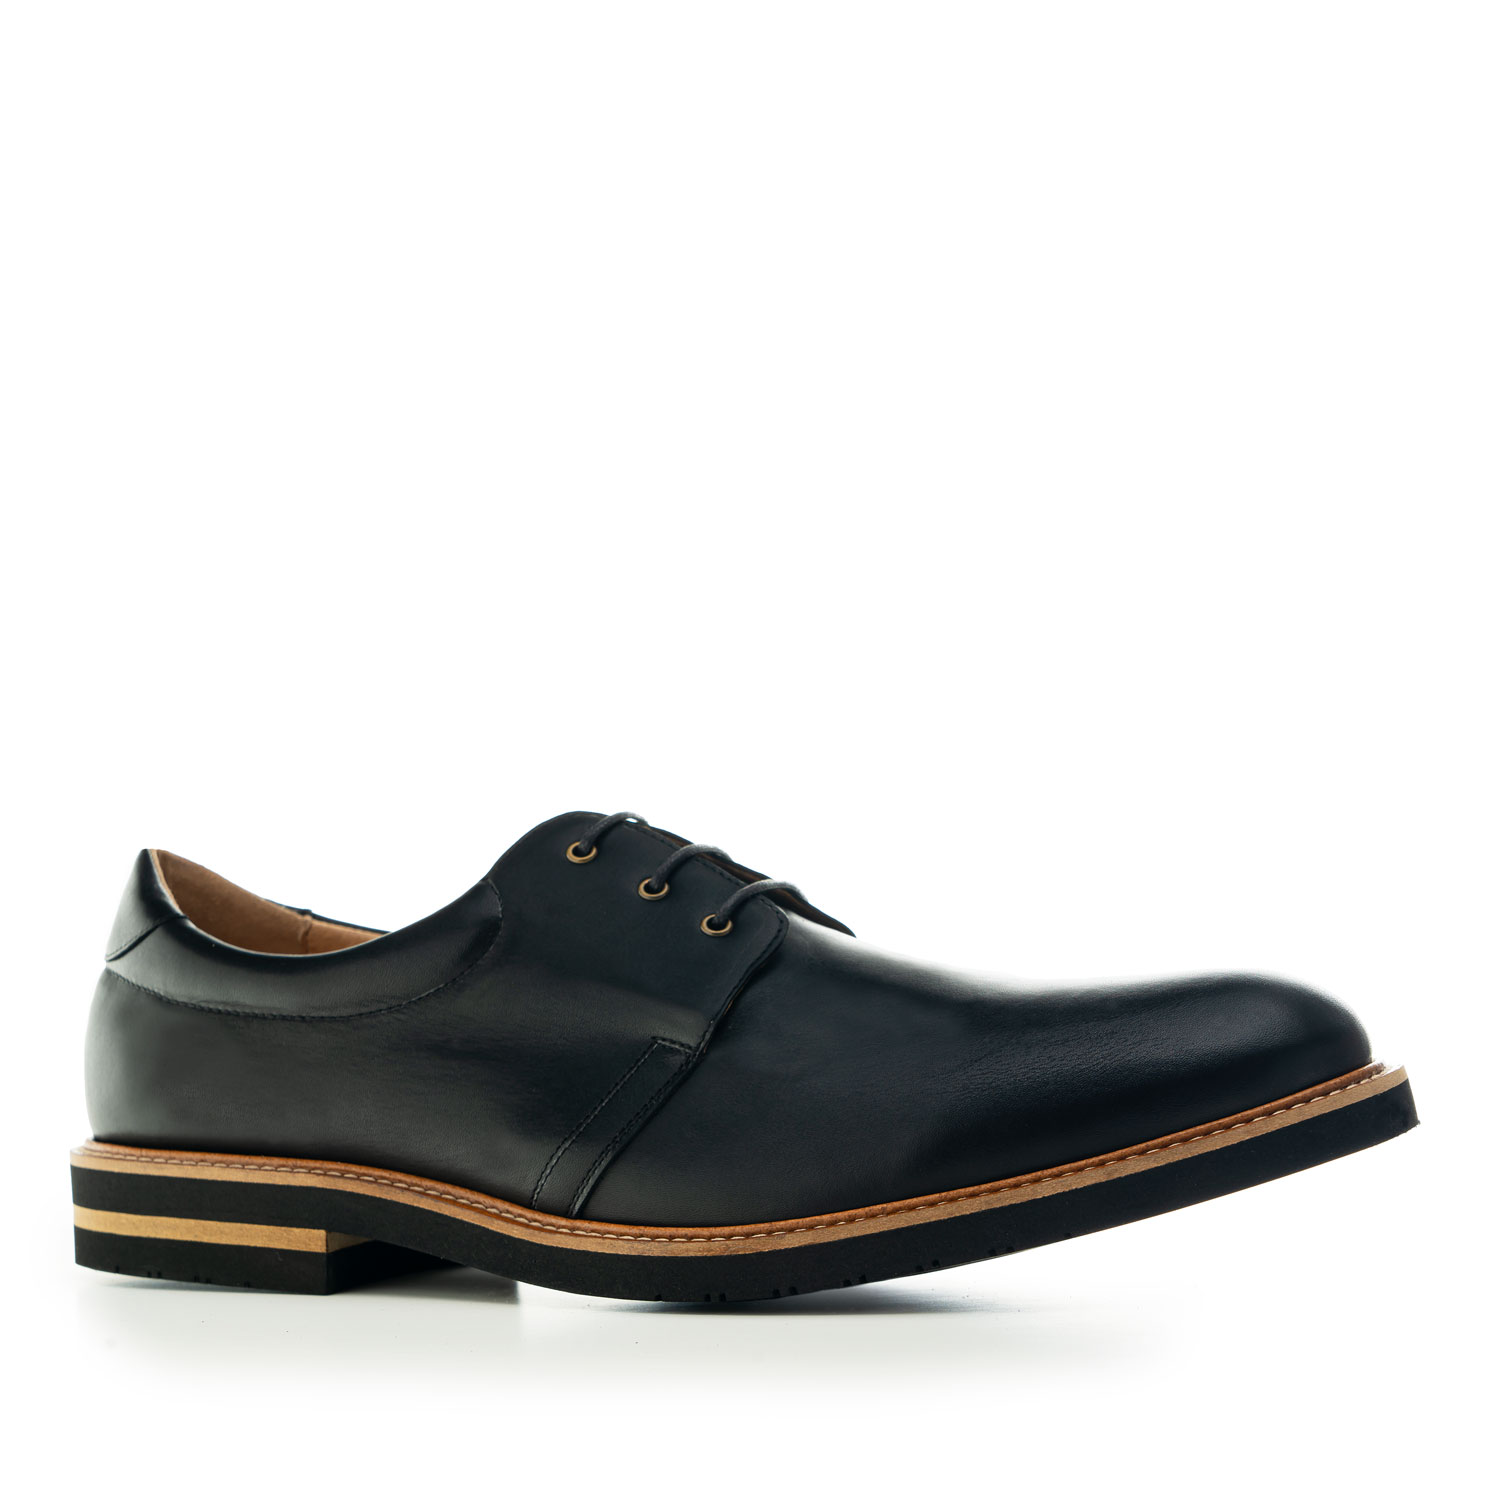 Men's Dress Shoes in Black Leather 